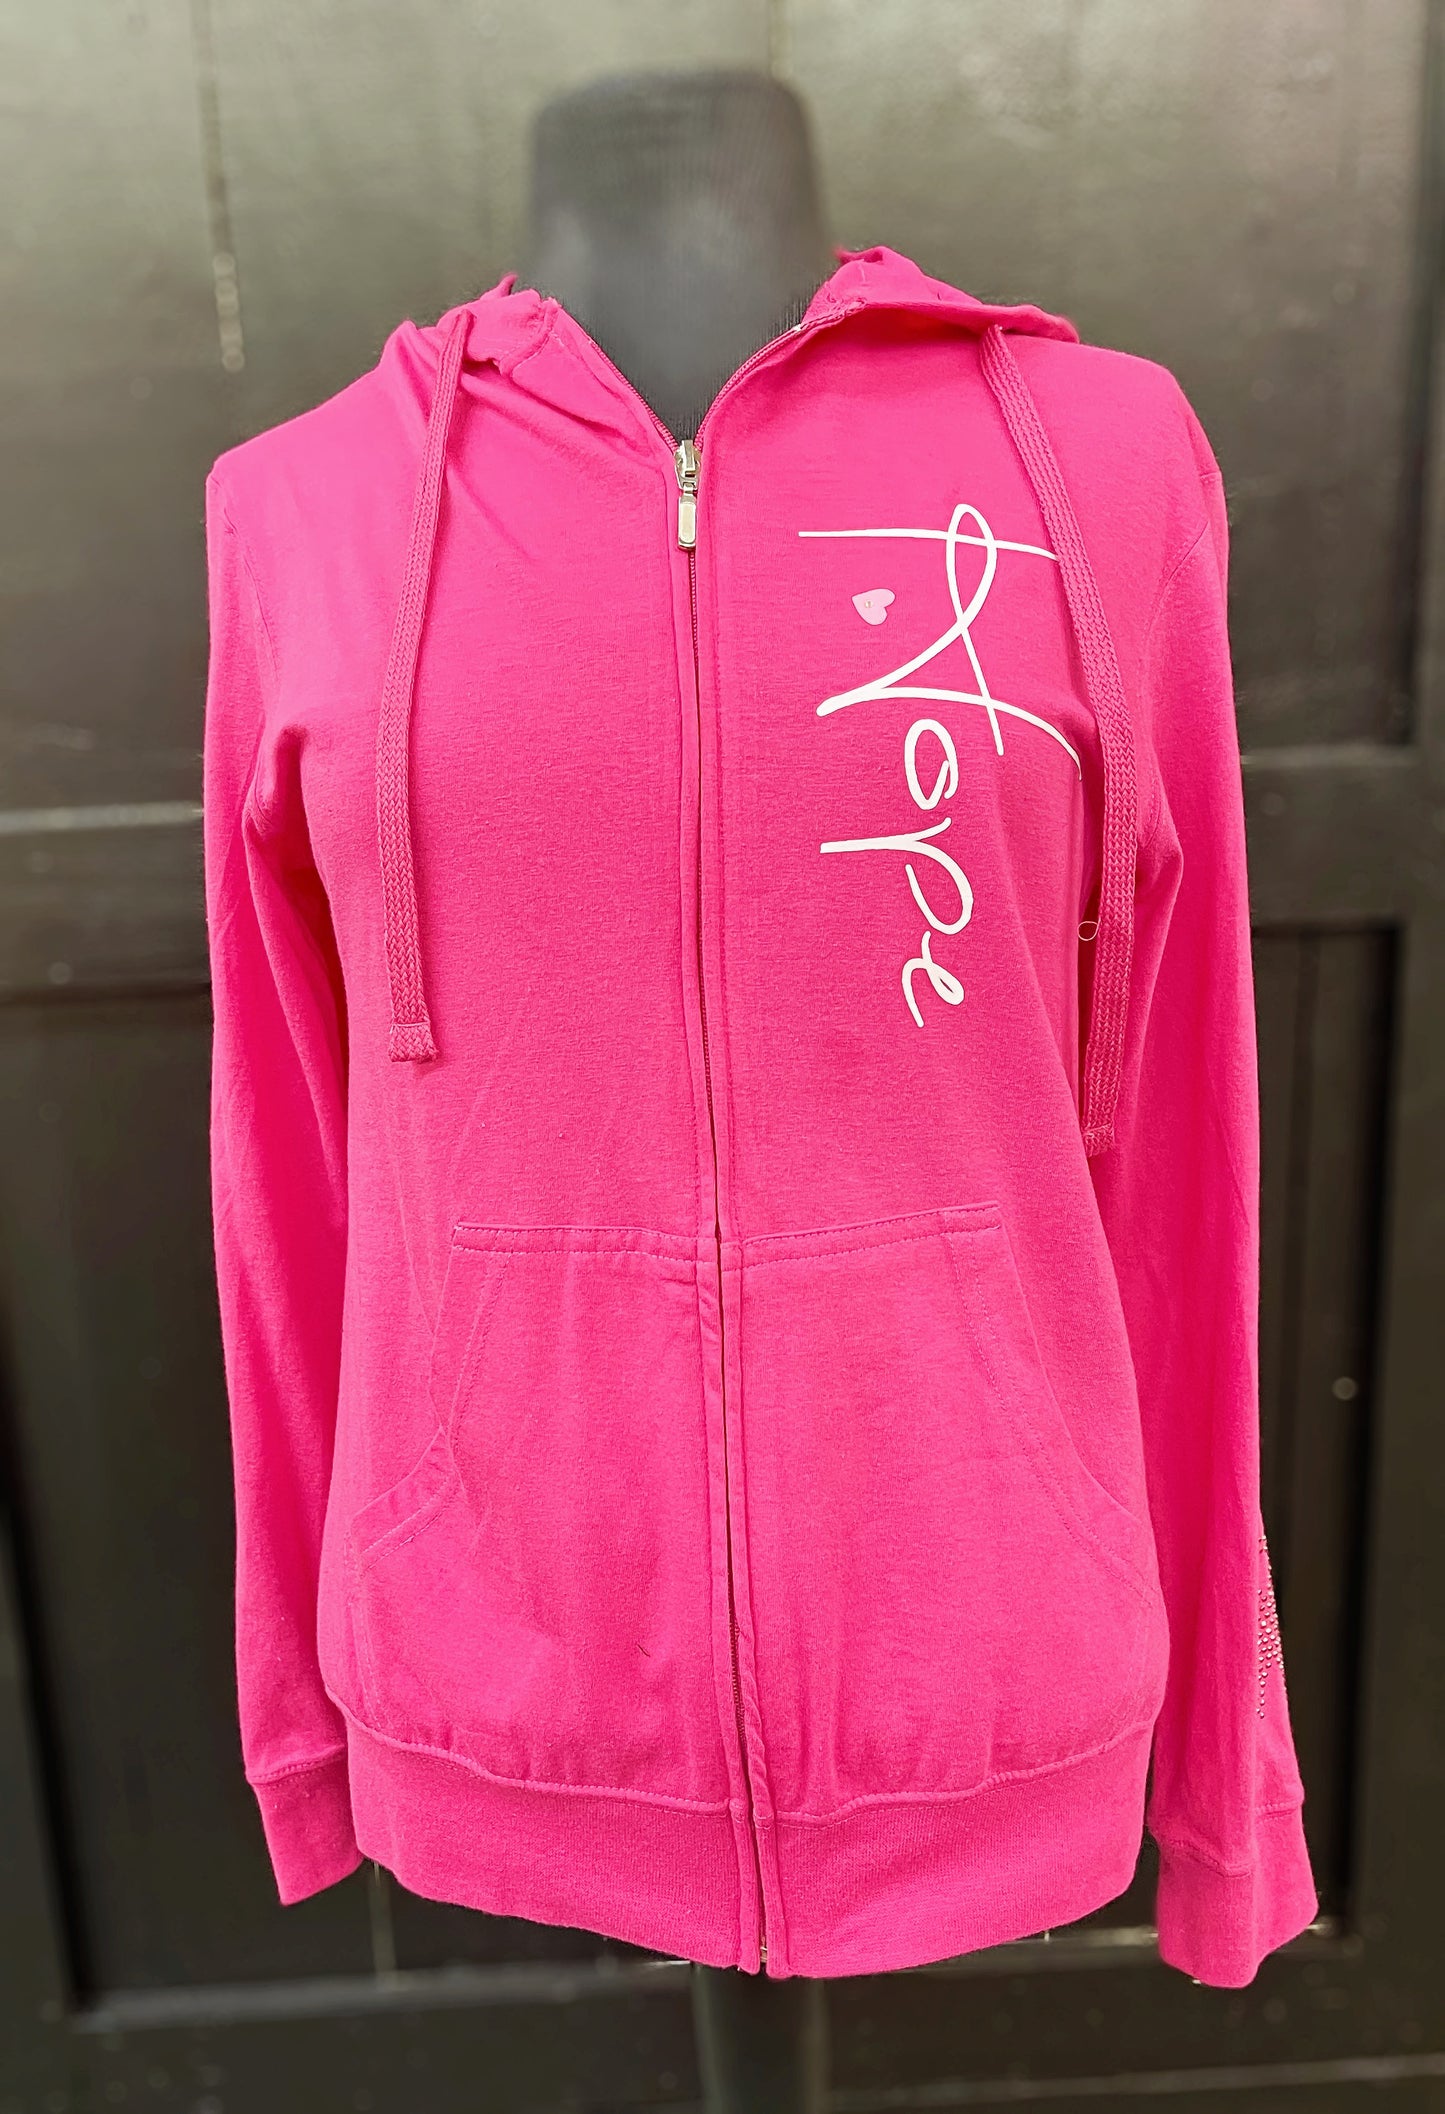 Outlaw Faith Wear Pink Light Weight Zip Jacket HOPE W/ Heart and Pink Ribbon.